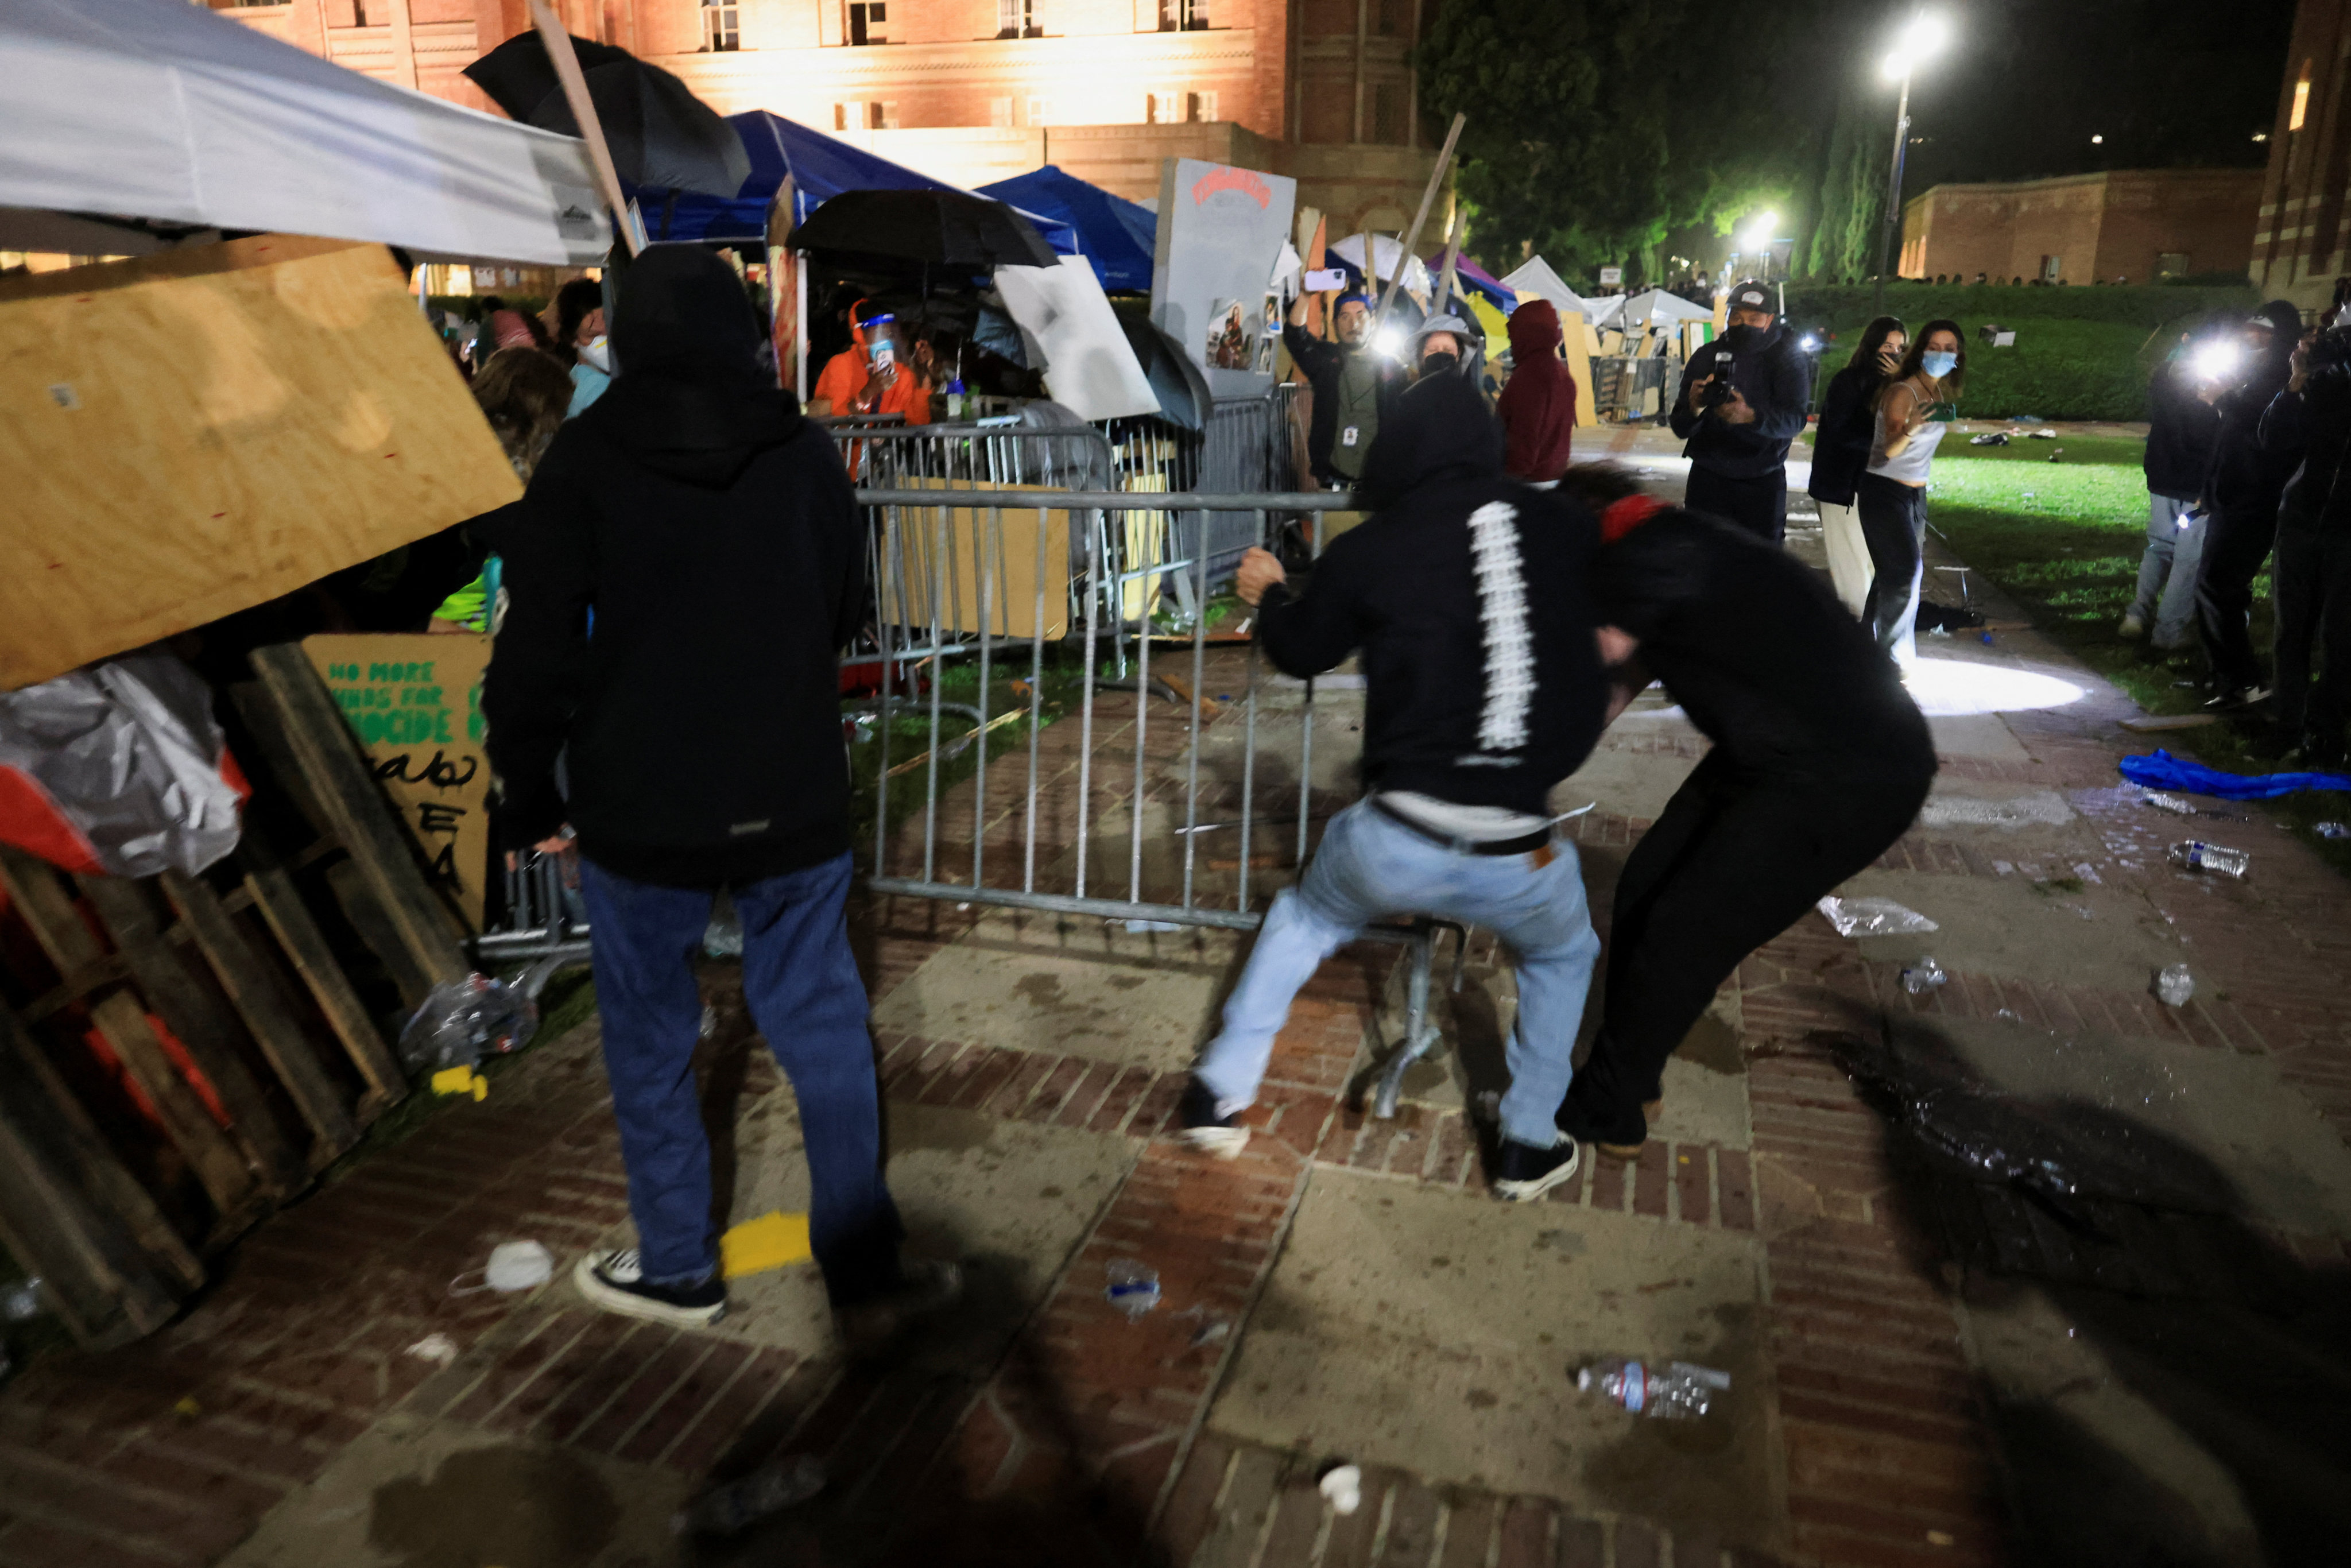 Counterprotesters attempt to move a barricade at an encampment on the campus of the University of California Los Angeles (UCLA). Photo: Reuters